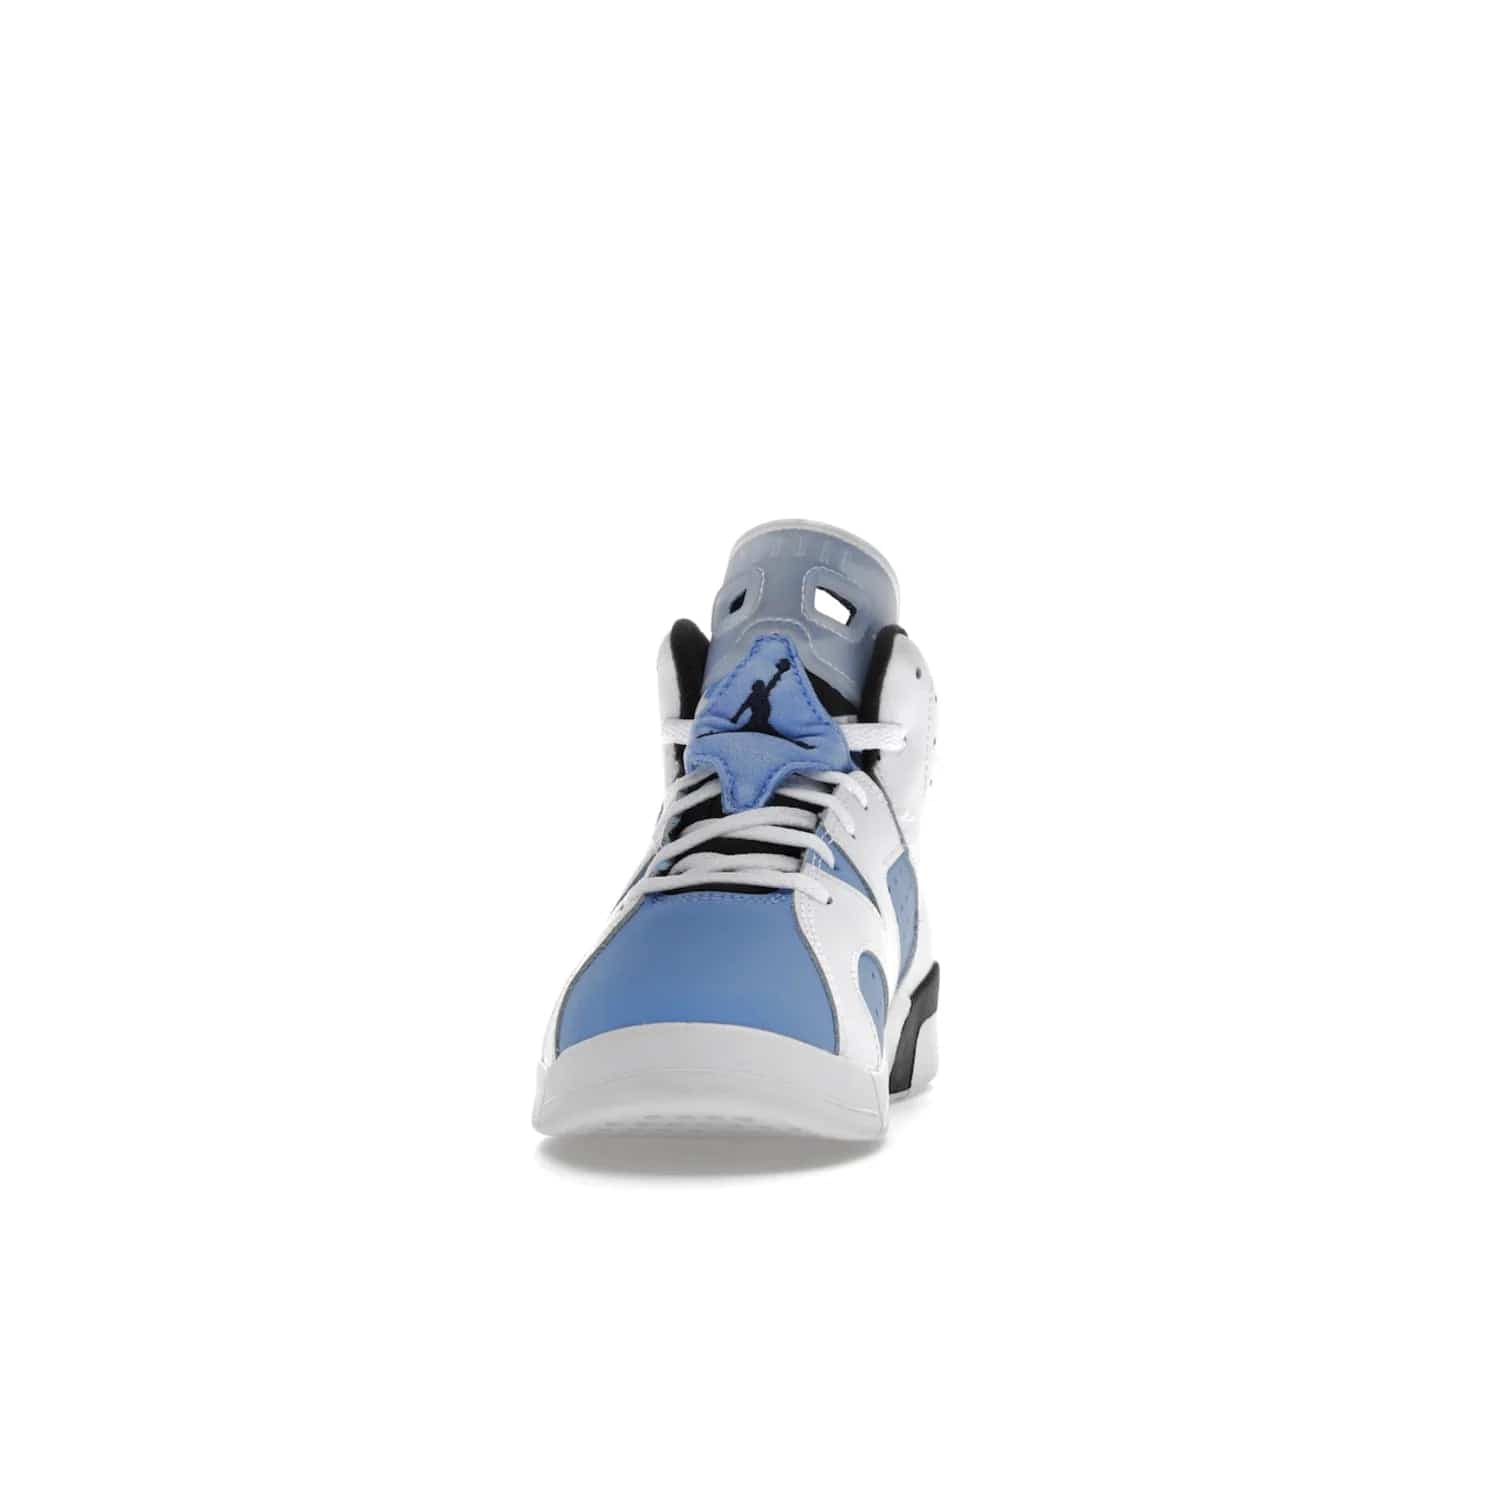 Jordan 6 Retro UNC White (PS) - Image 11 - Only at www.BallersClubKickz.com - The Air Jordan 6 Retro UNC White PS celebrates Michael Jordan's alma mater, the University of North Carolina. It features a classic color-blocking of the iconic Jordan 6 Carmine and a stitched Jordan Team patch. This must-have sneaker released on April 27th, 2022. Referencing the university colors, get this shoe for a stylish and timeless style with university pride.